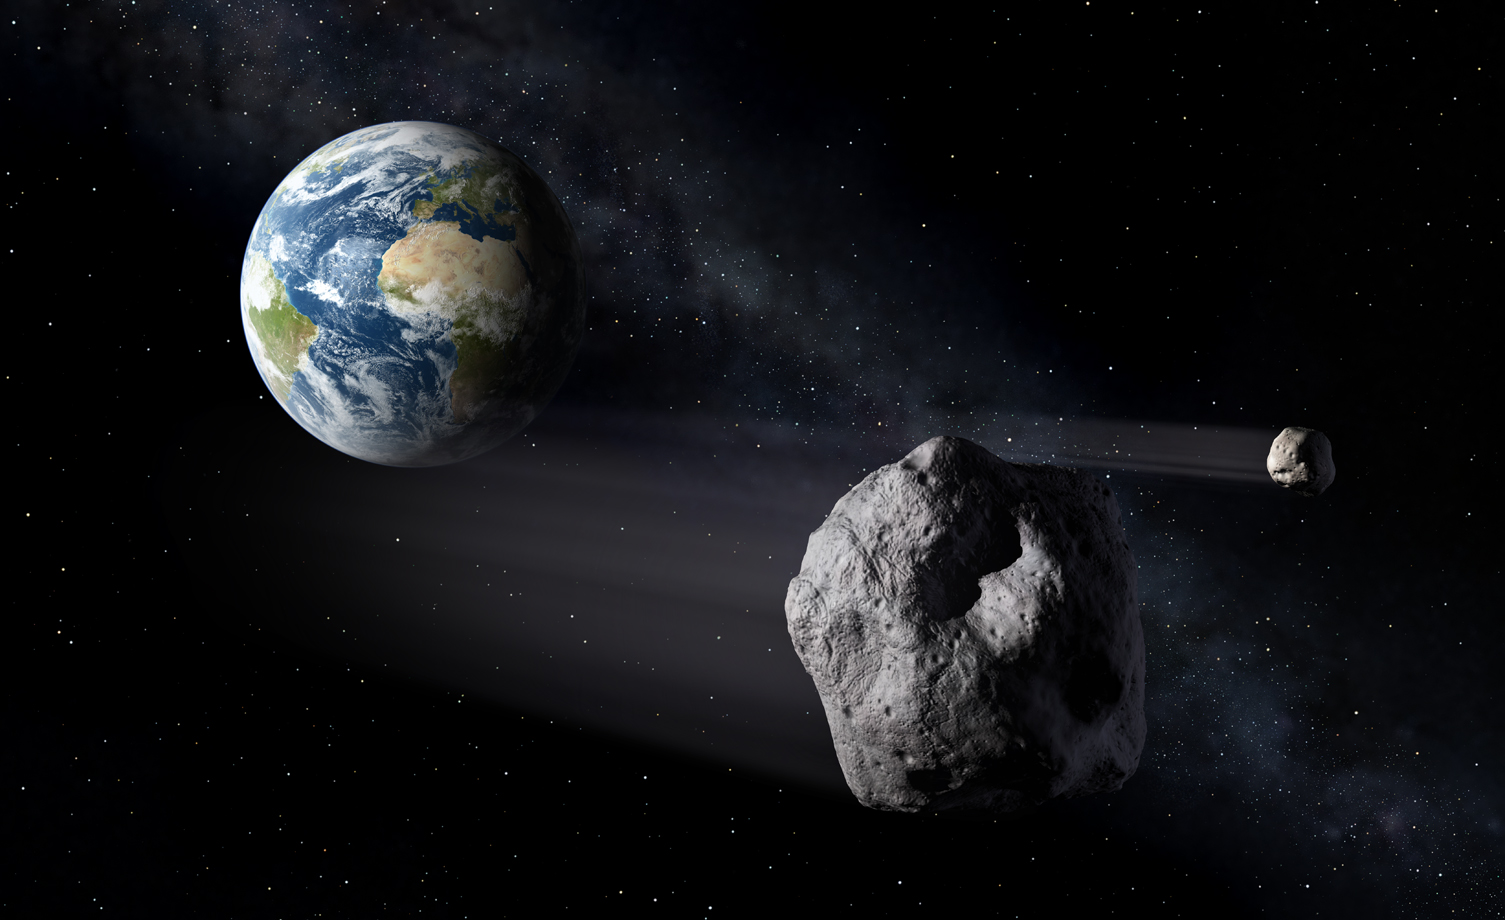 Illustration - Asteroids pass close to Earth in this illustration. NASA is partnering with Berkeley Lab to study meteorite materials to better understand how meteors fracture as they enter Earth’s atmosphere and assess the risks they pose. (Credit: ESA/P.Carril)